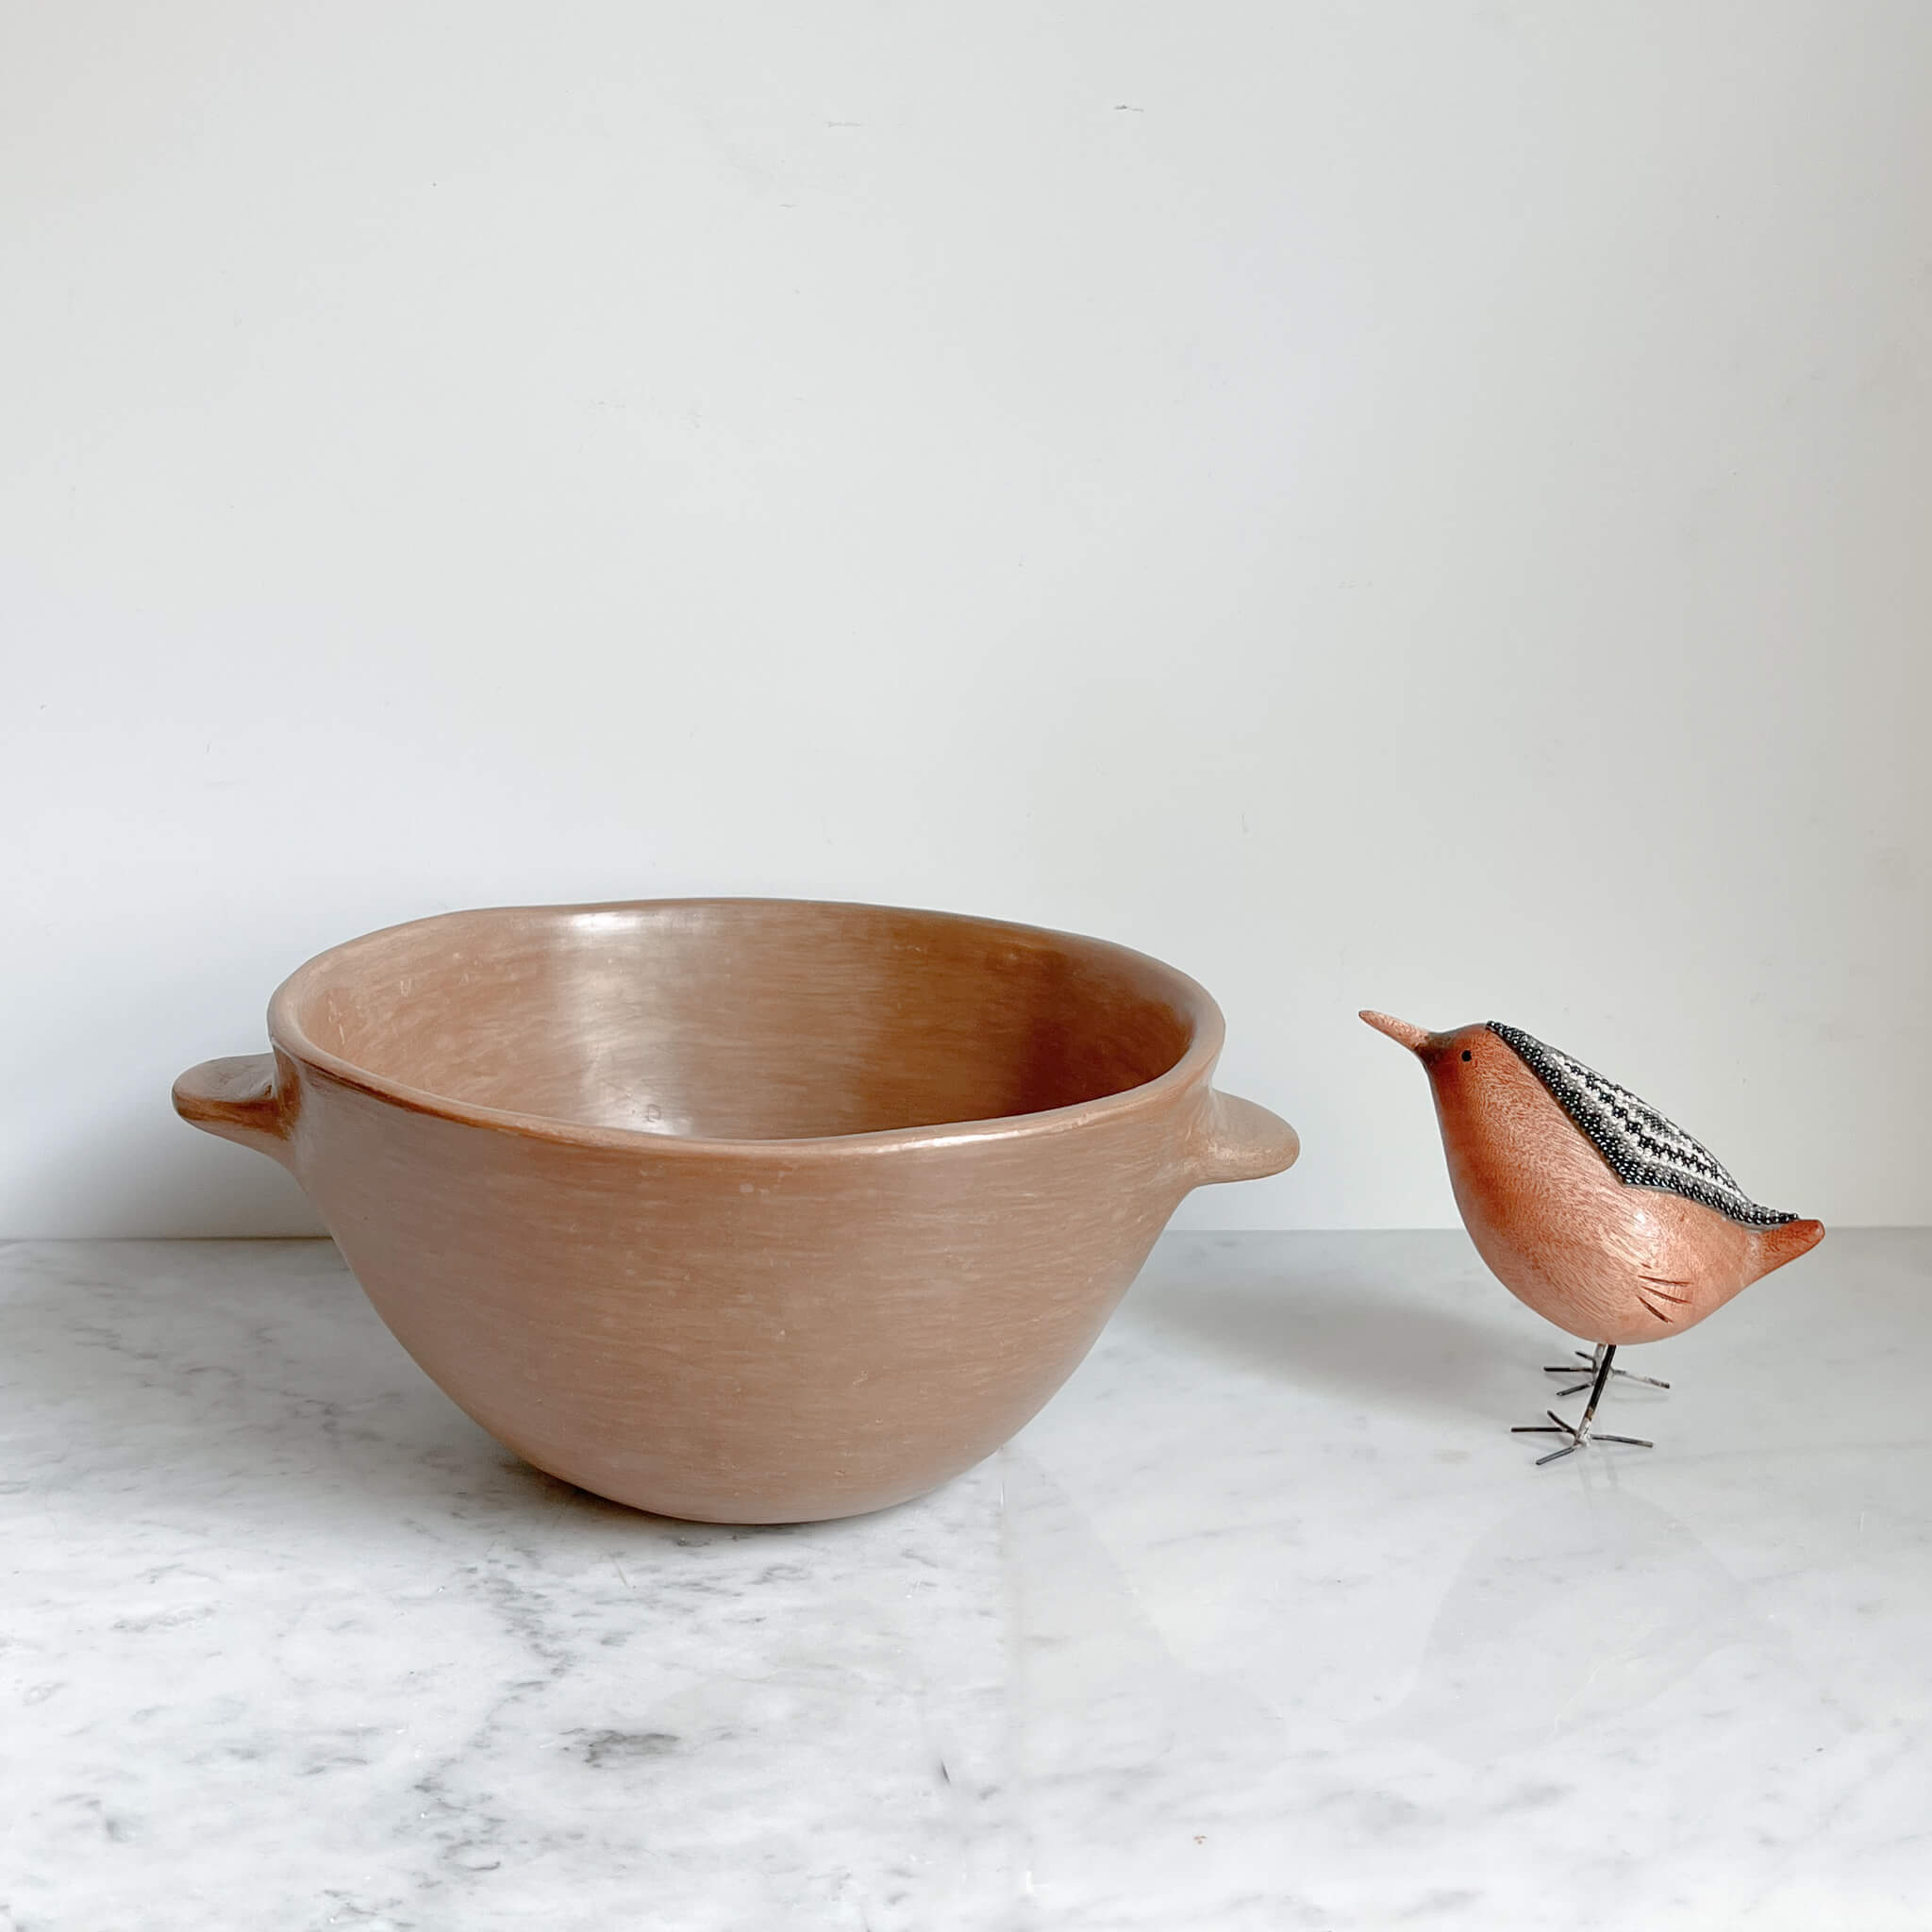 A large clay serving bowl made in Puebla, Mexico.